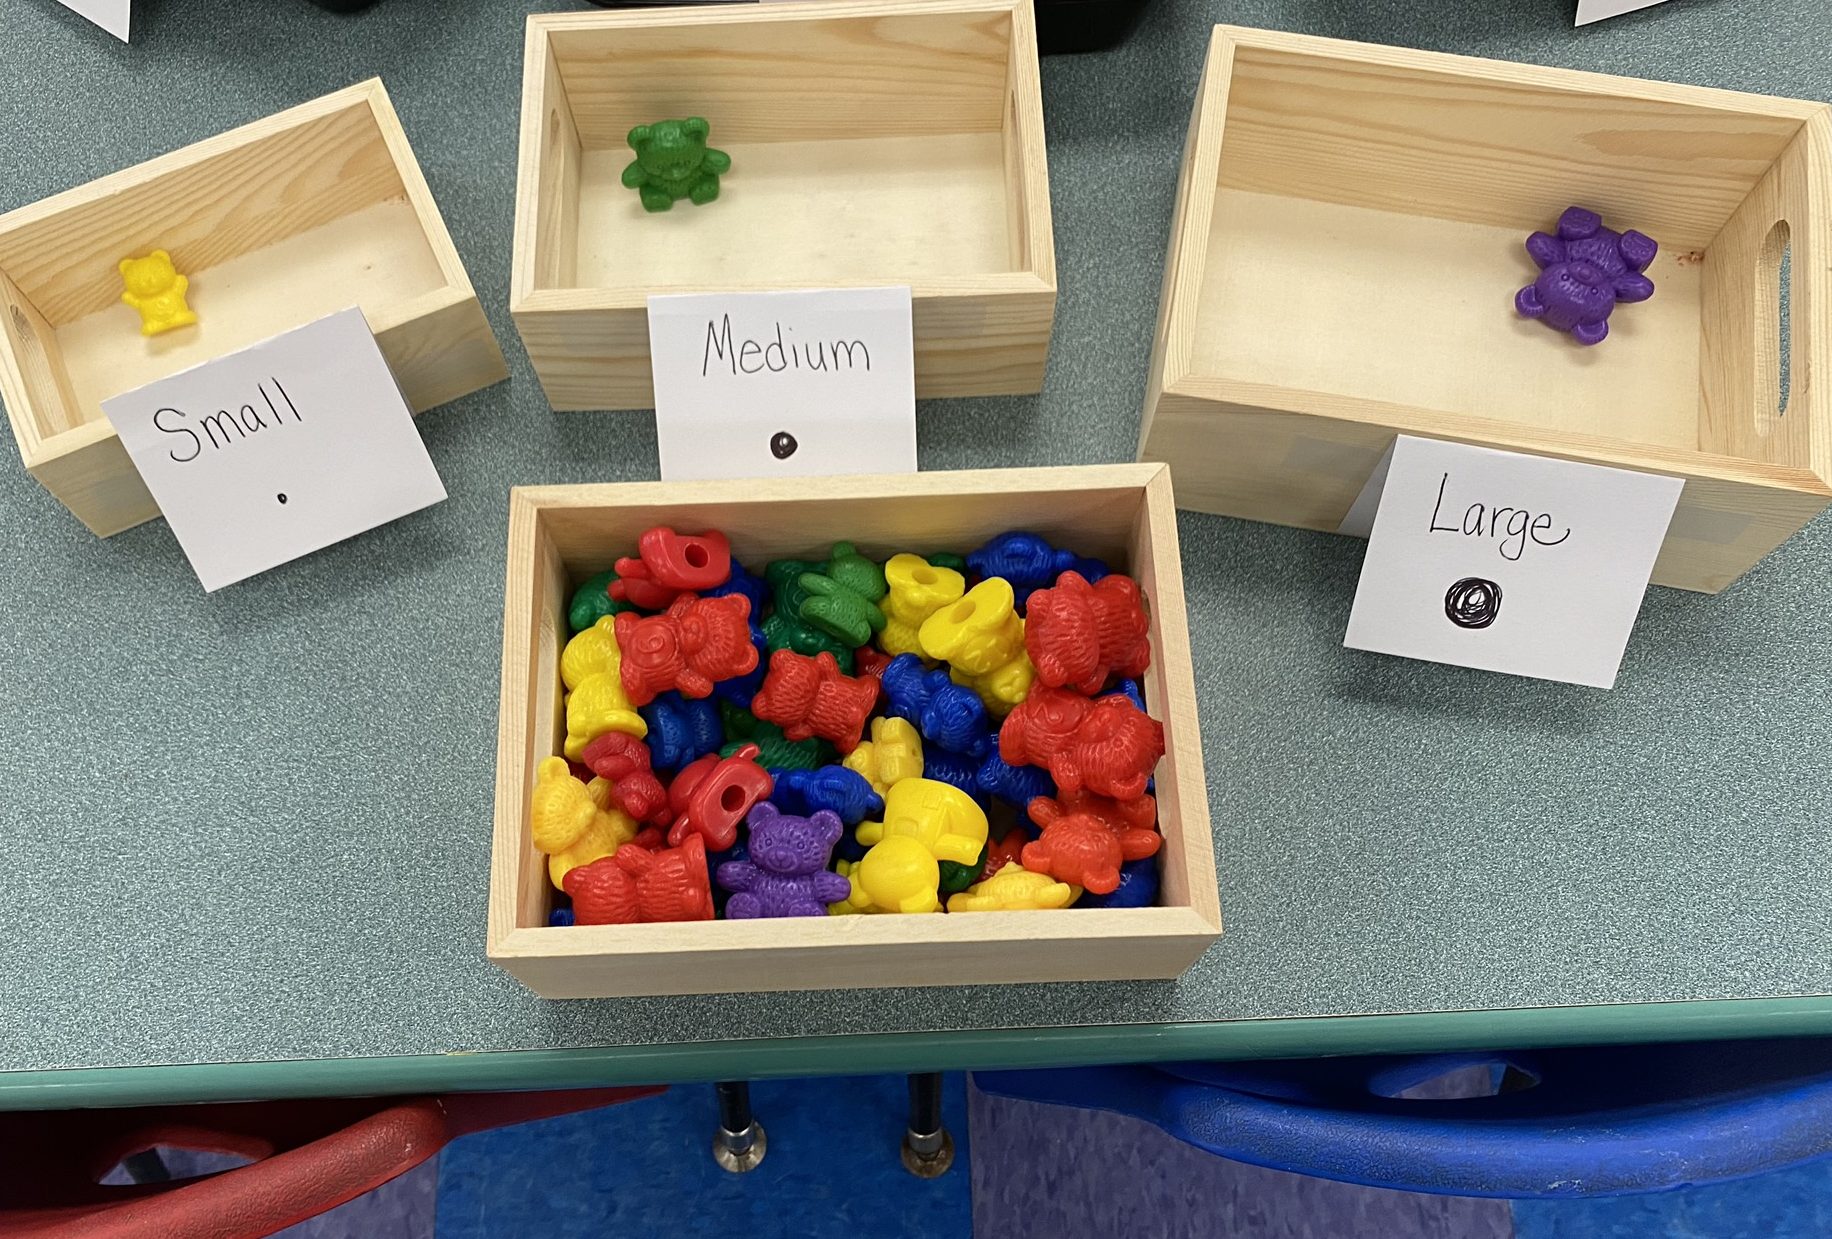 small-medium-and-large-mixed-object-sorting-activity-for-preschoolers